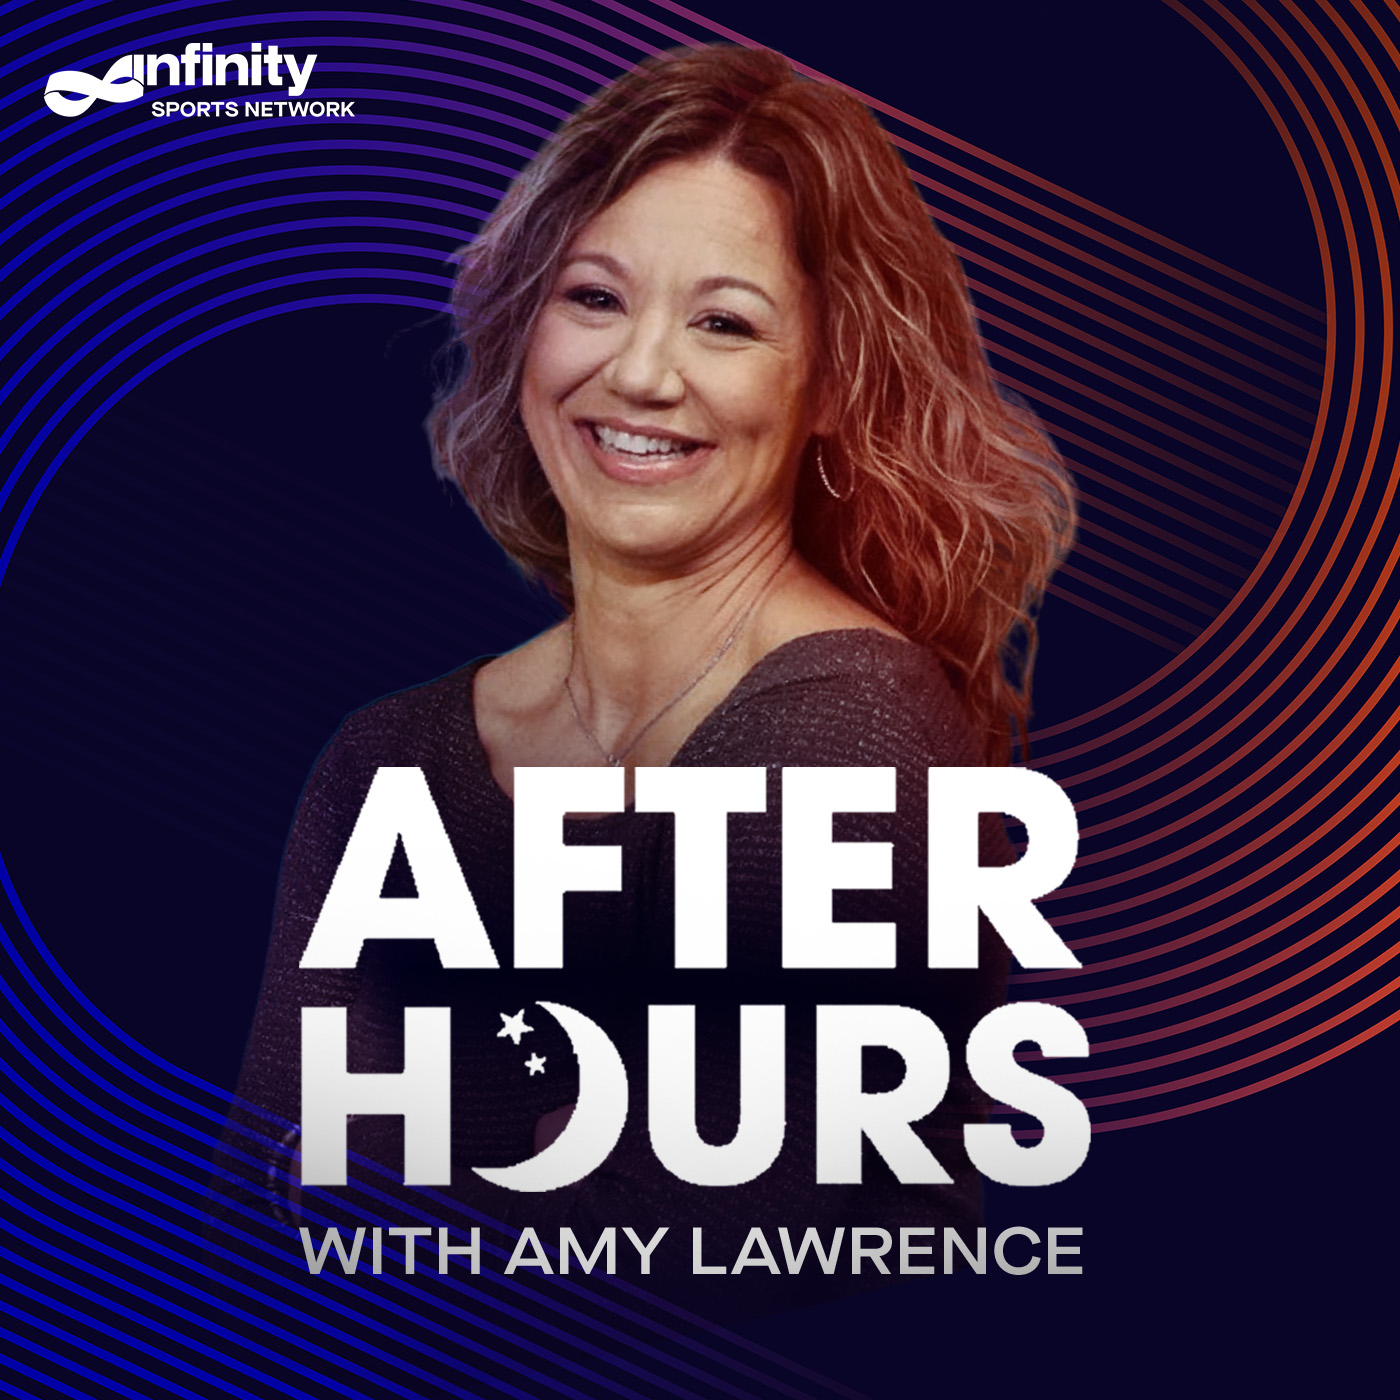 8-24-21 After Hours with Amy Lawrence PODCAST: Hour 4